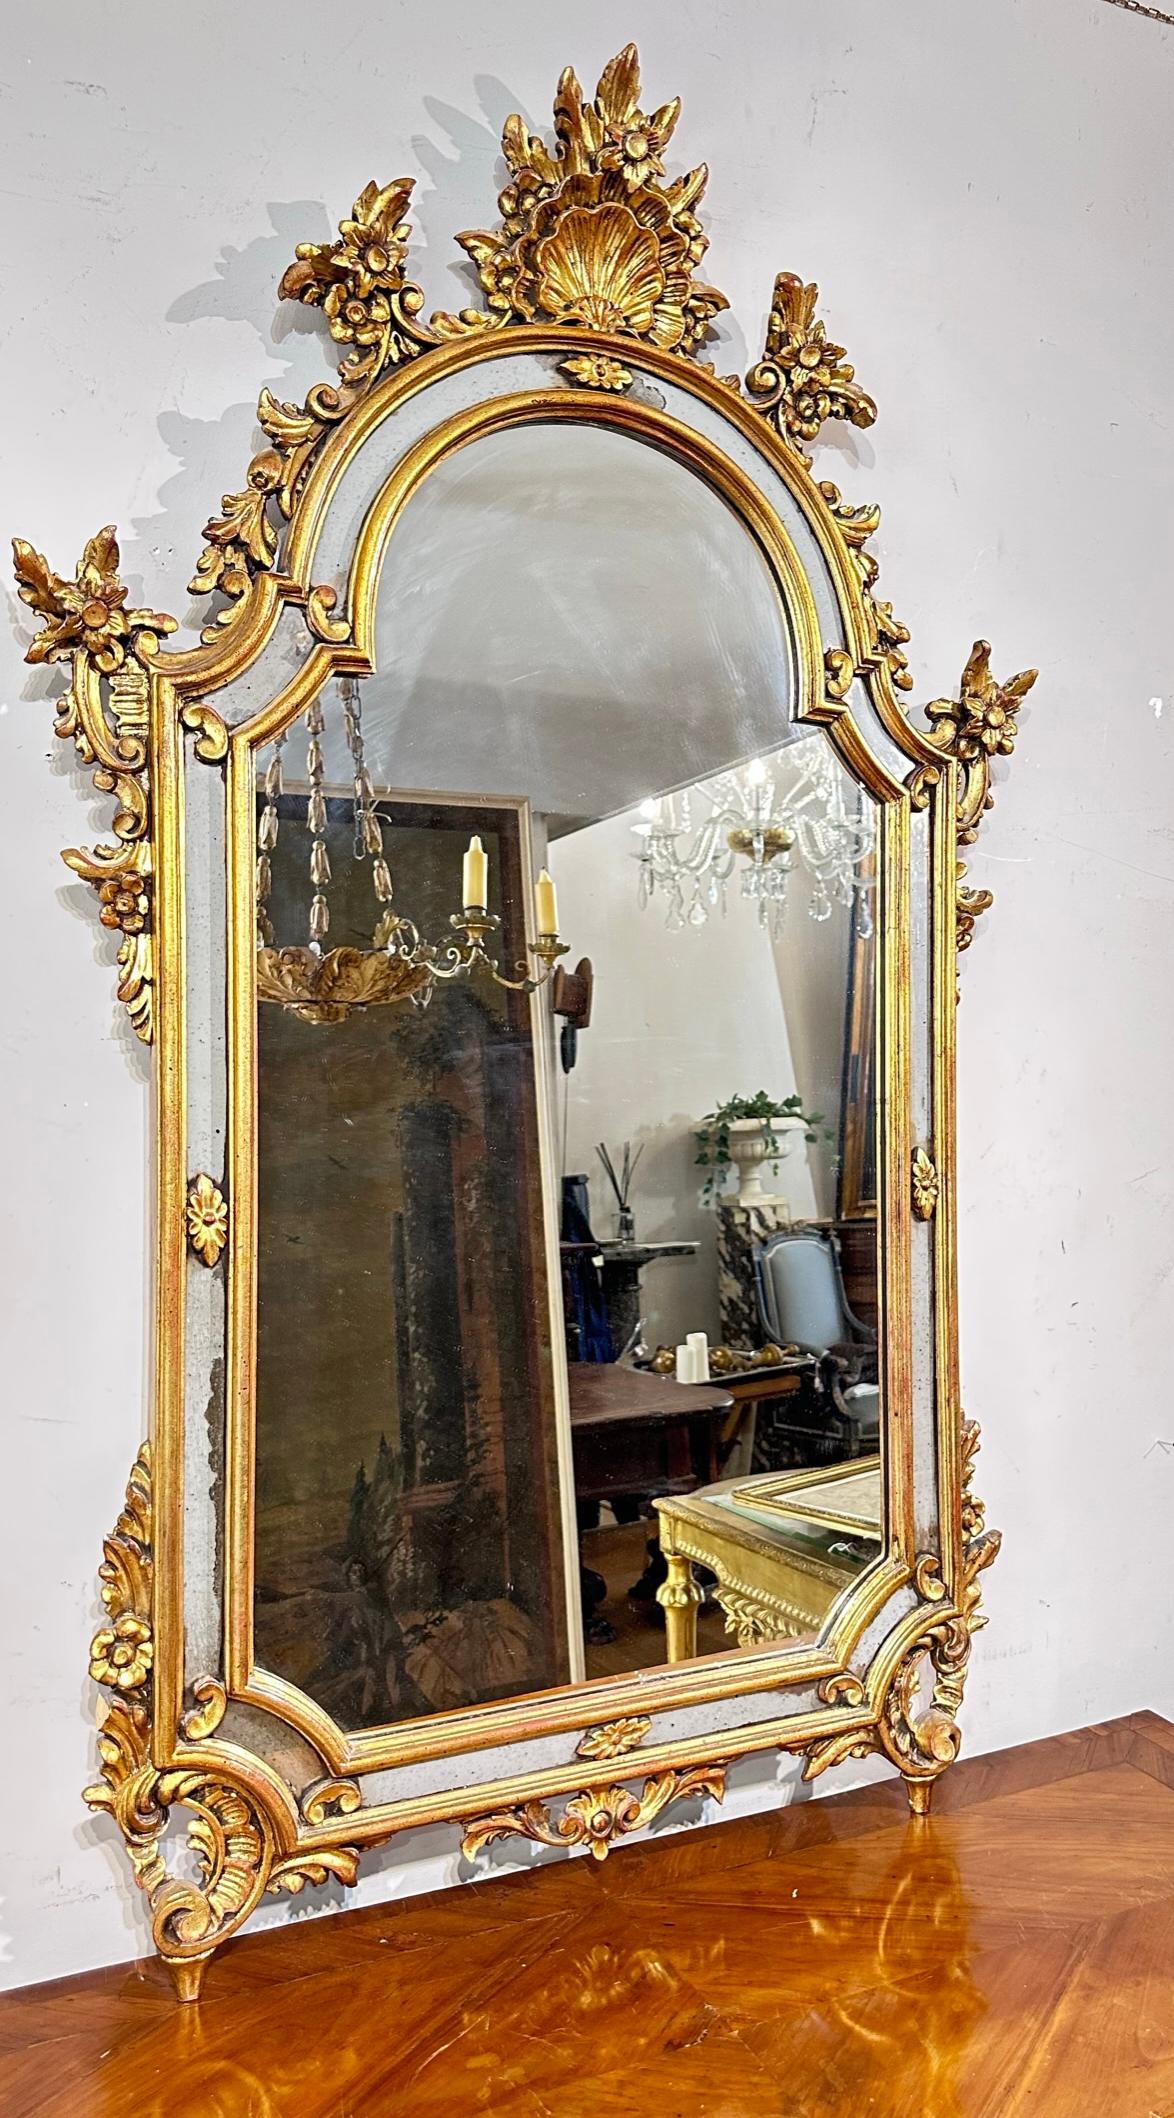 Elegant mirror in carved and gilded wood with floral and shell frame. The central part is in mirror. There are mirror inserts also in the frame. Italian manufacture from the second half of the 19th century.

Measures HxWxD 130 x 82 x 4 cm